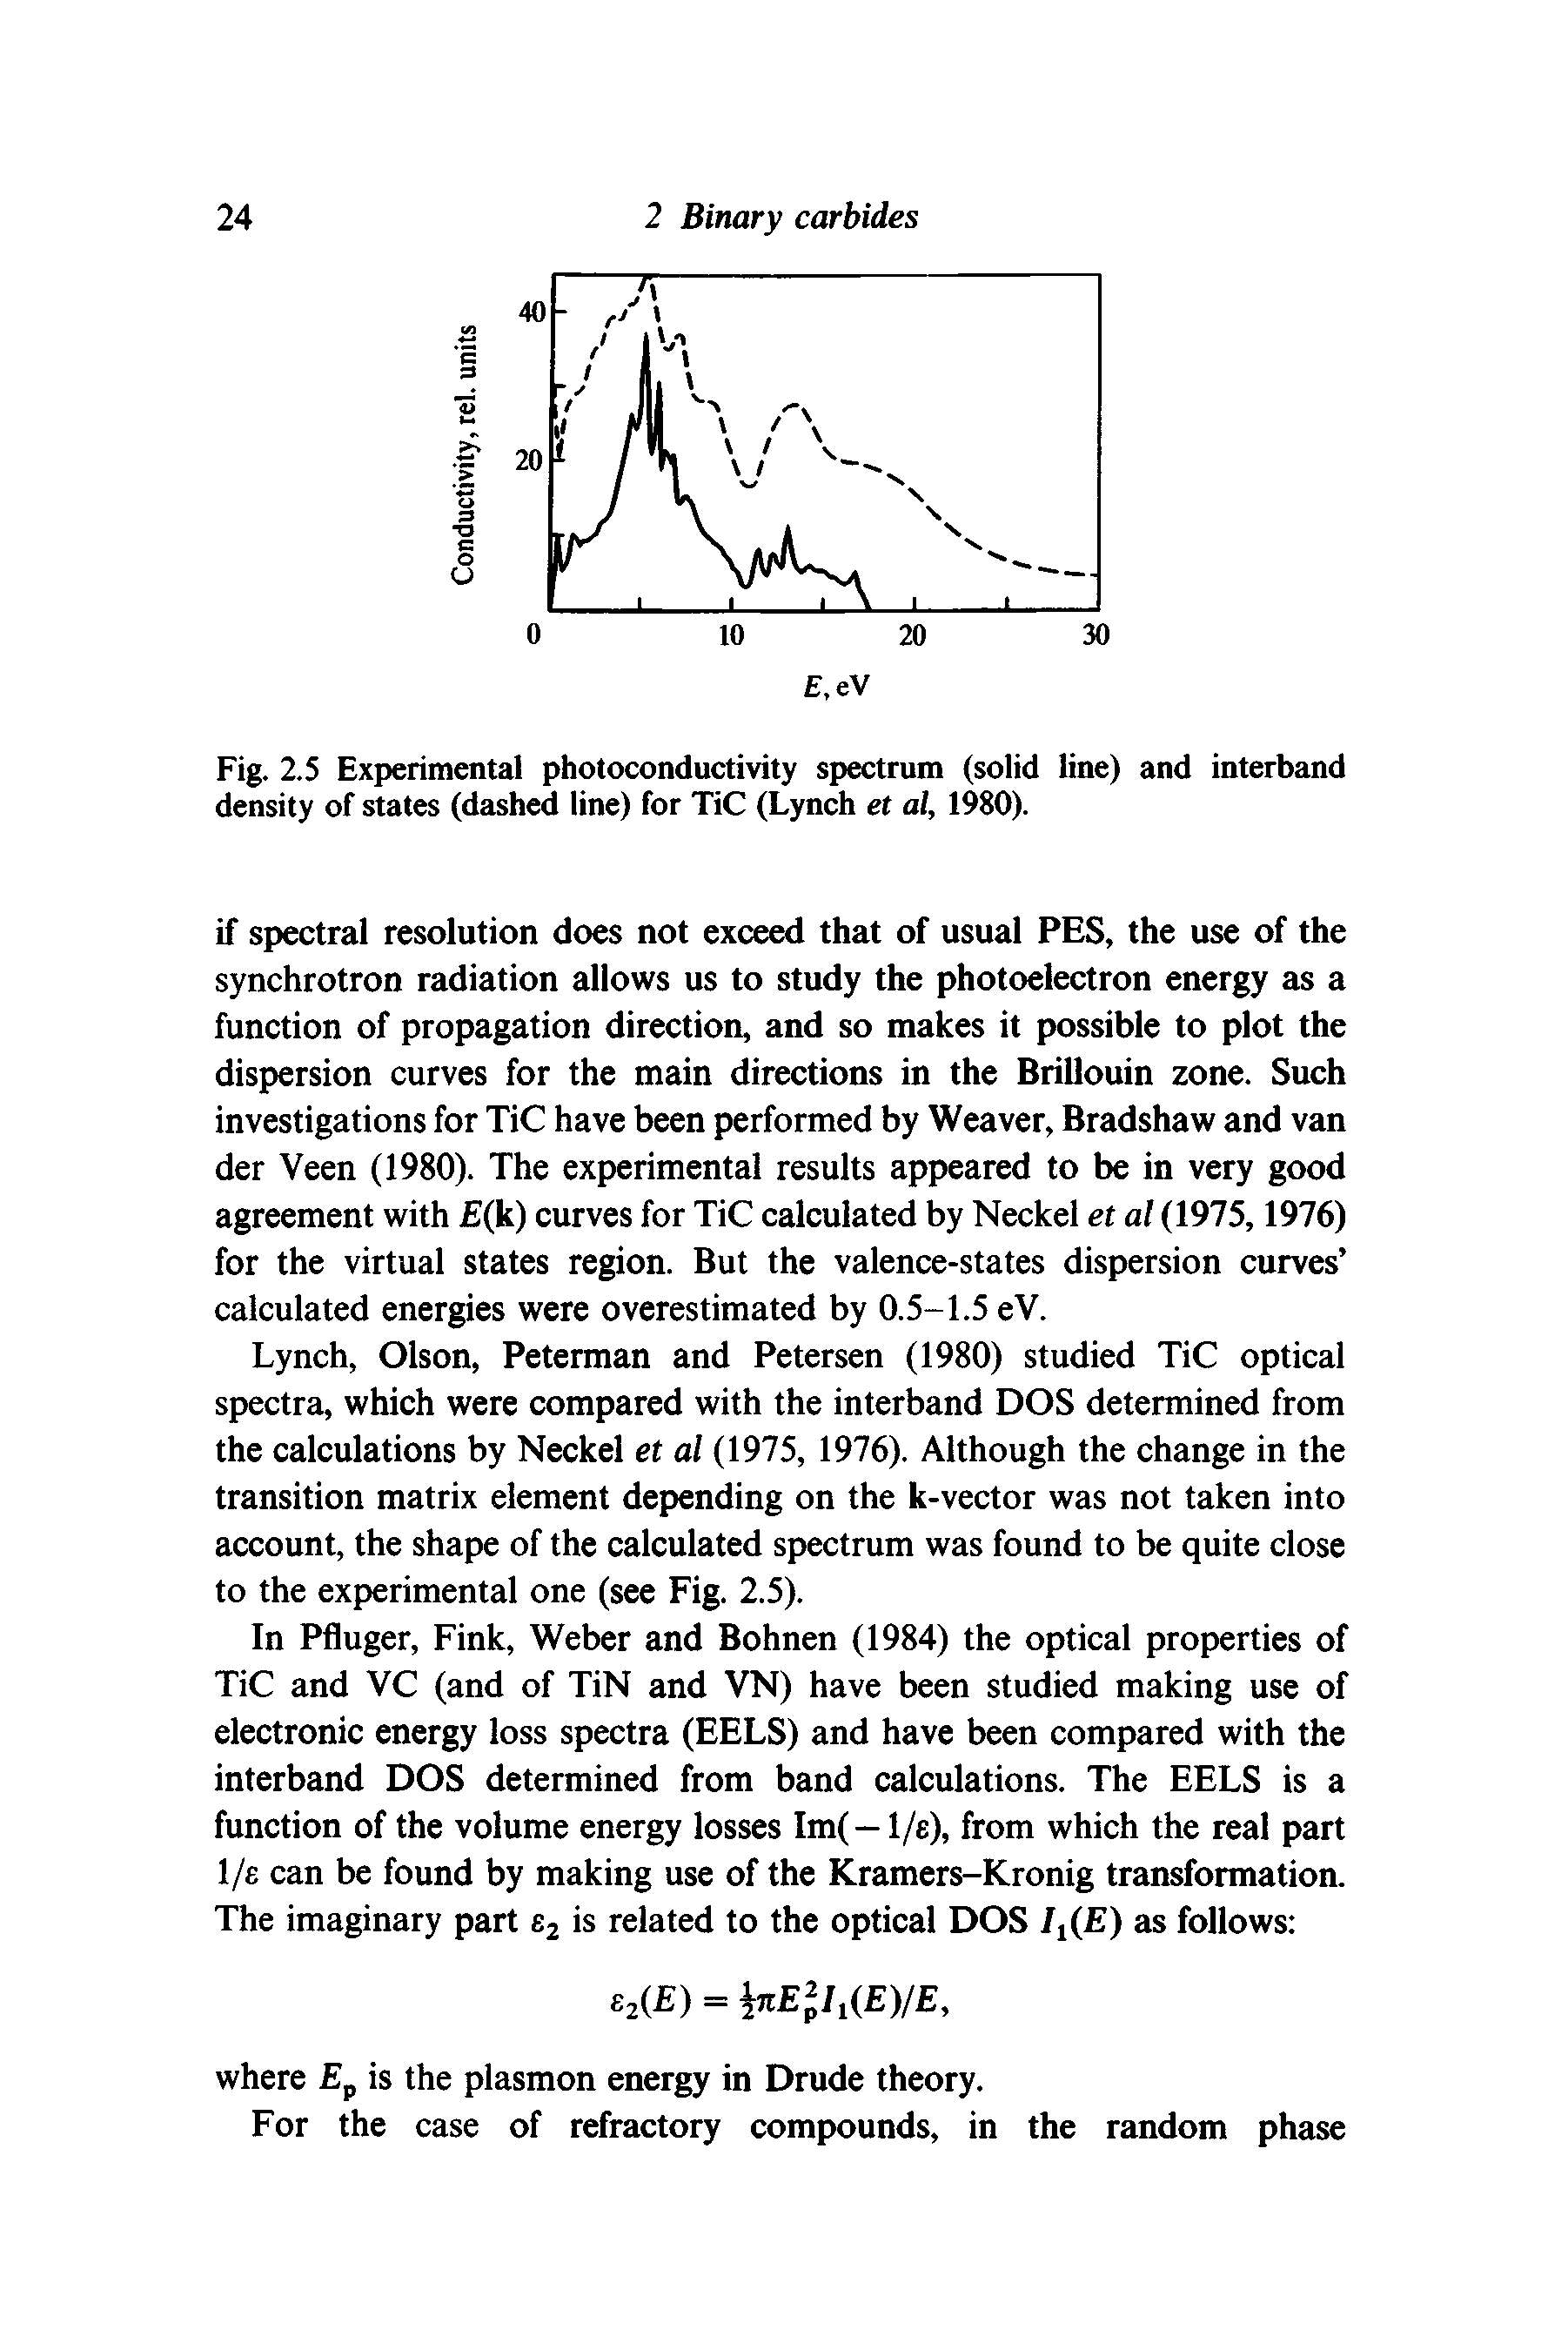 Fig. 2.5 Experimental photoconductivity spectrum (solid line) and interband density of states (dashed line) for TiC (Lynch et al, 1980).